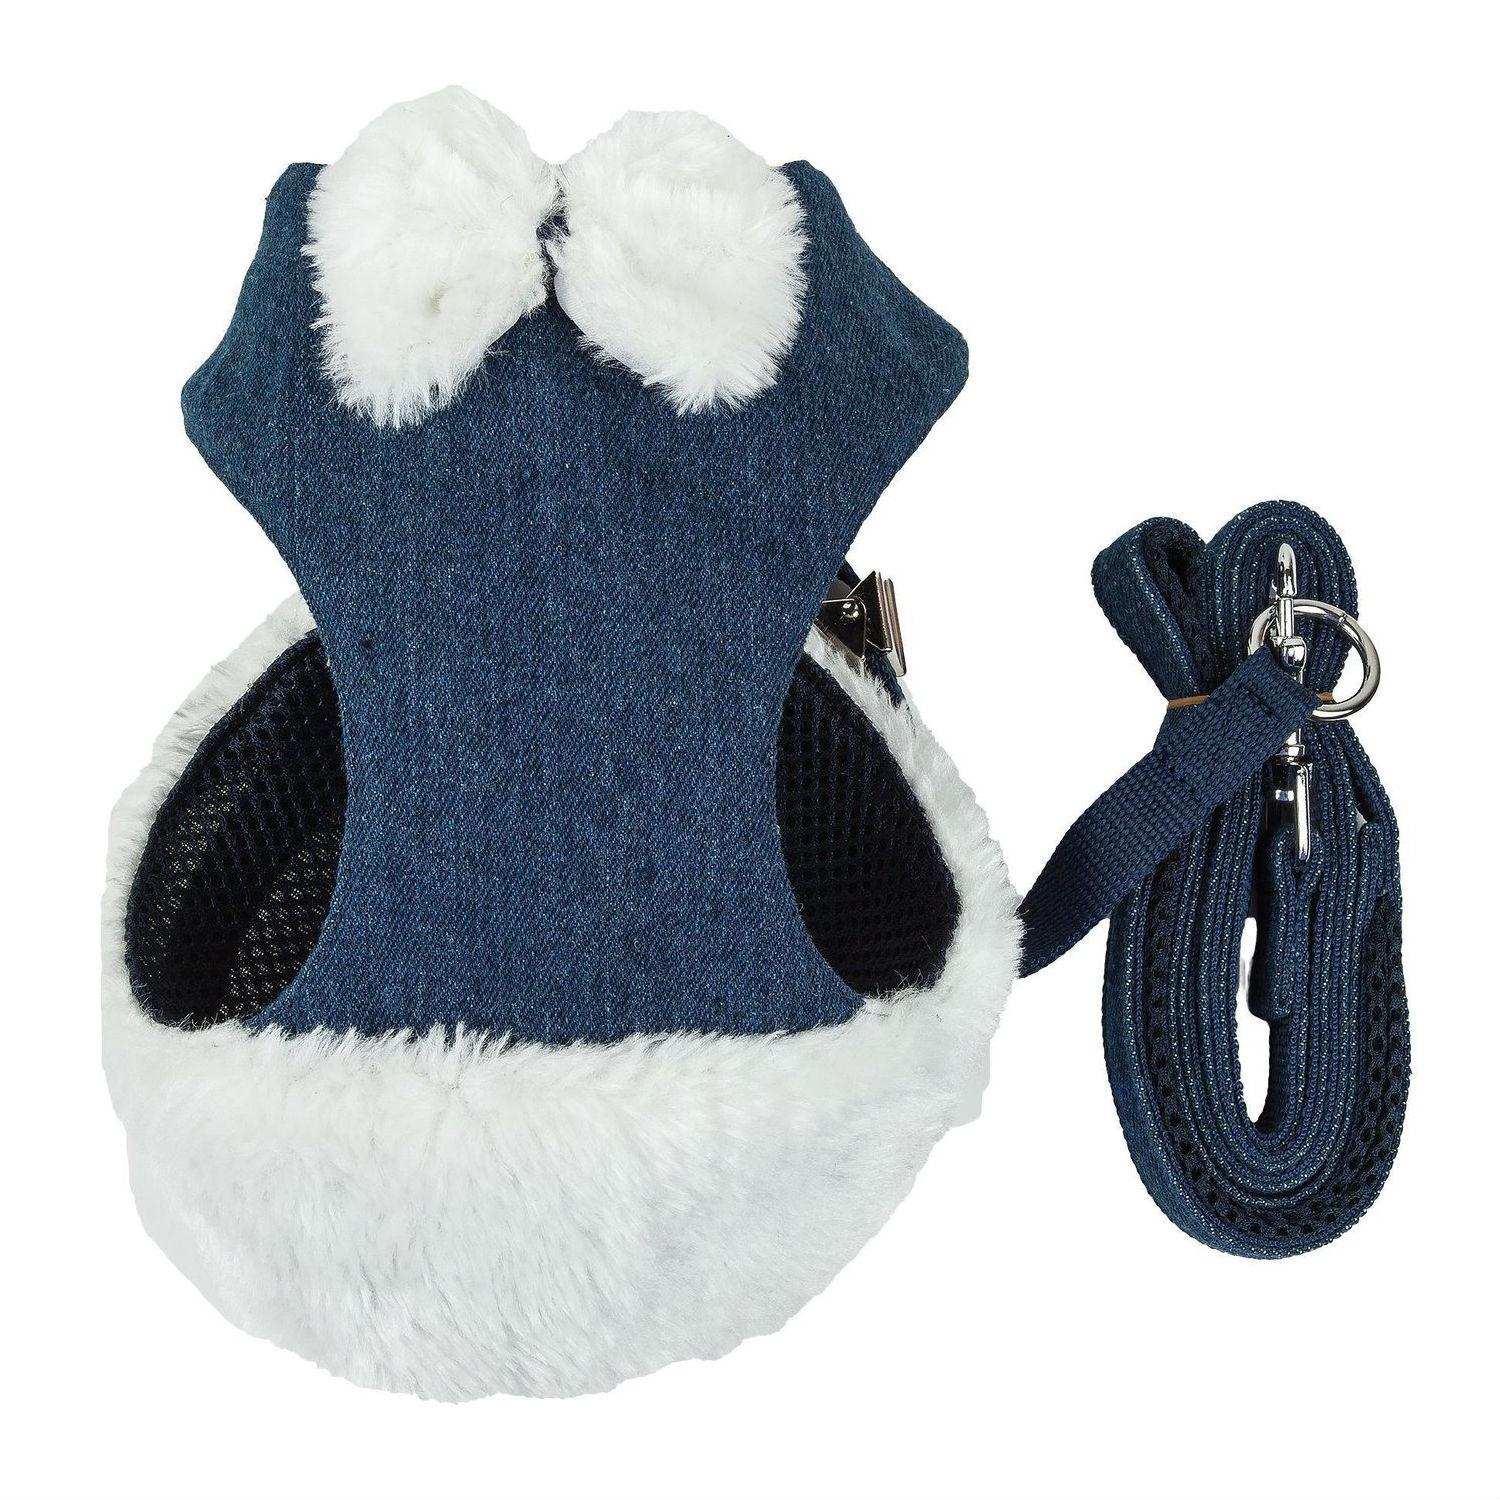 Pet Life Luxe Pom Draper Dog Harness and Leash - Blue